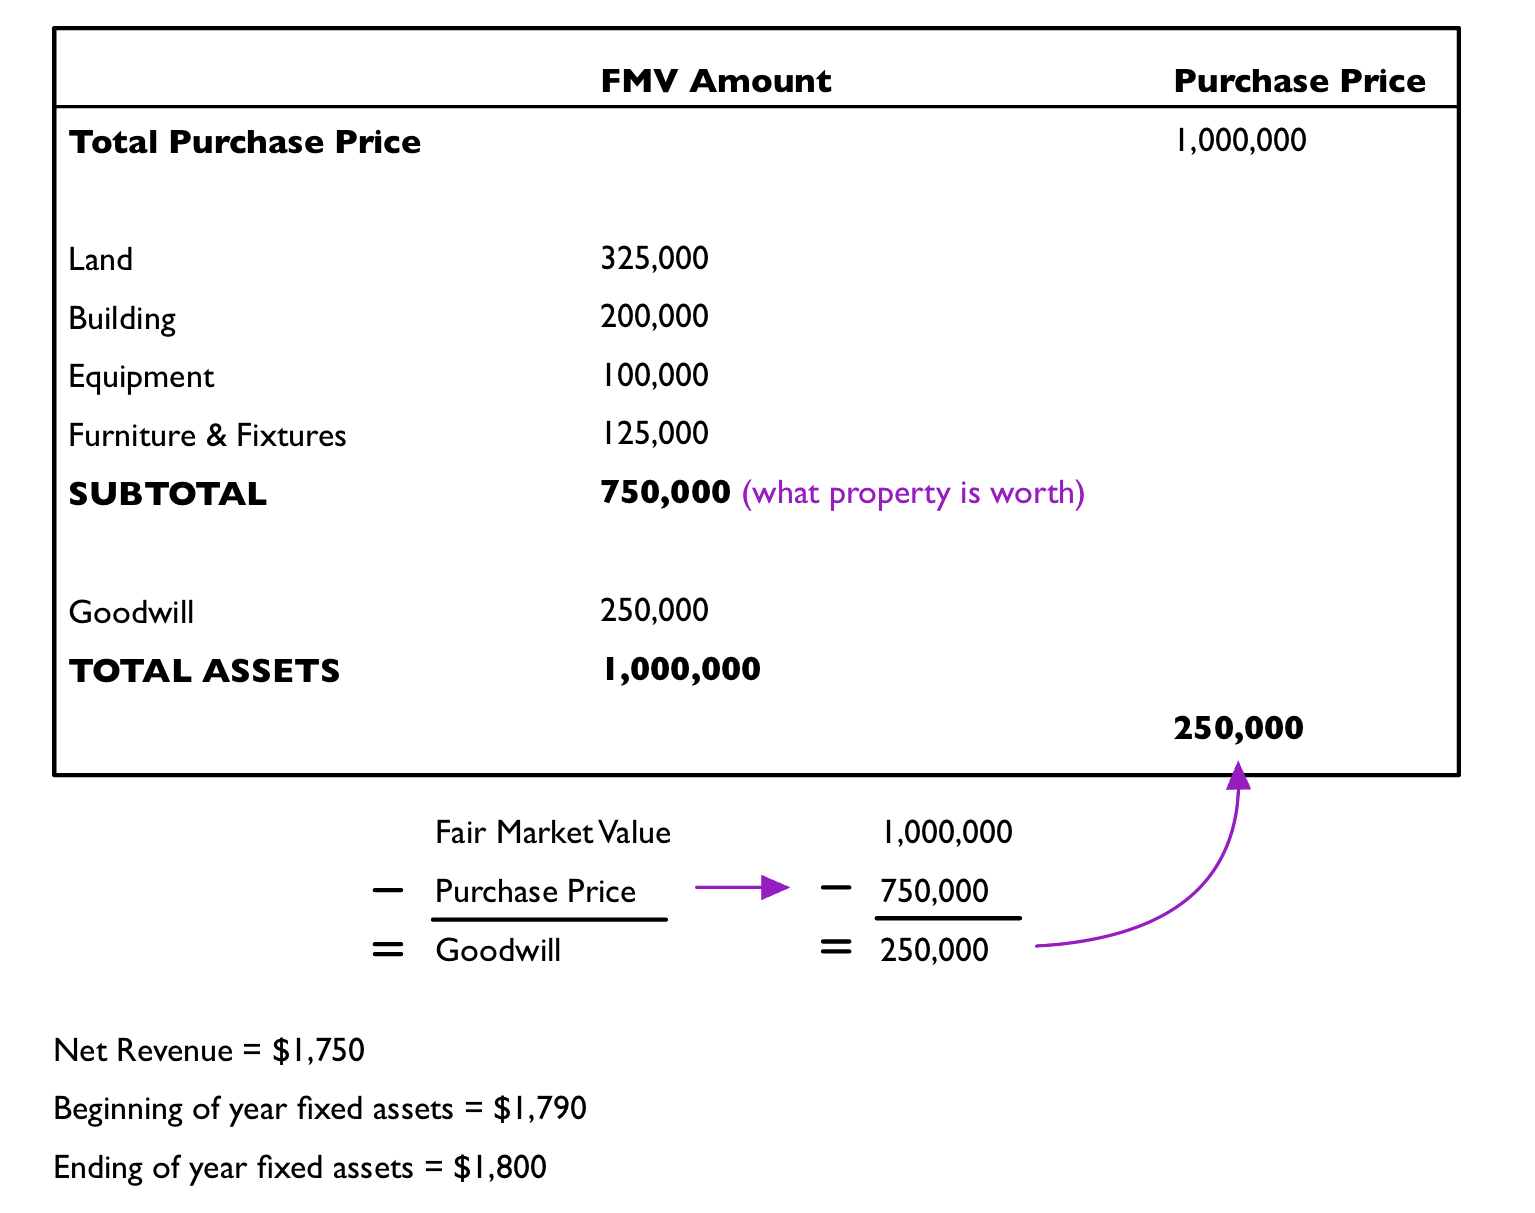 Given this information, you use the purchase price of all of the assets and subtract the fair market value total of the assets to find Goodwill. 